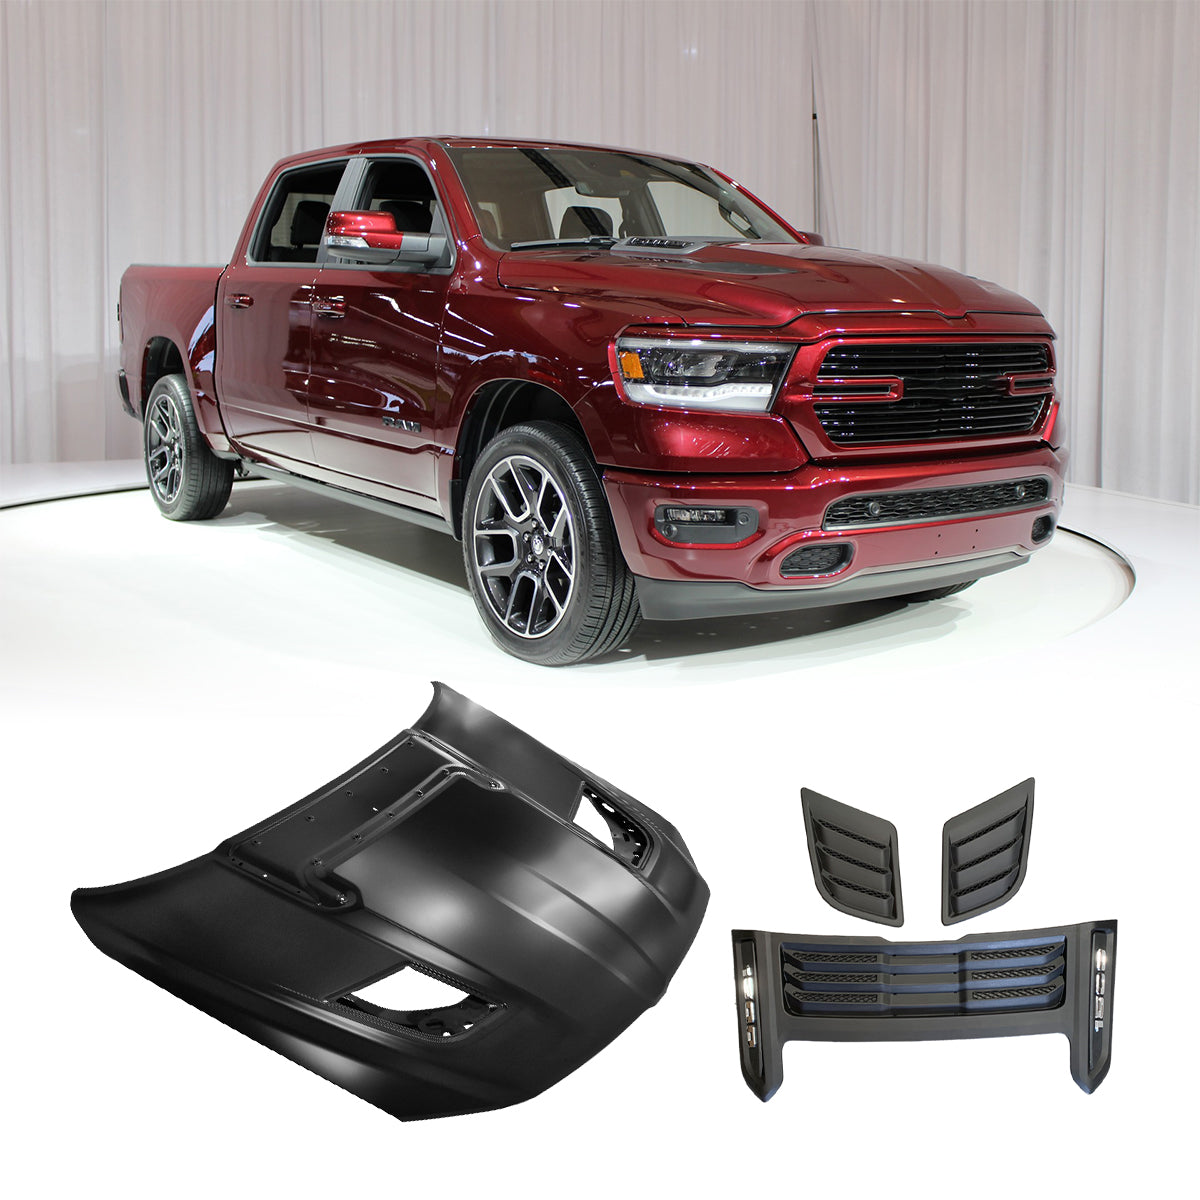 Replacement HOOD, BASE, 2019-2022 Ram 1500 REBEL(WITH VENTS), (Alum)